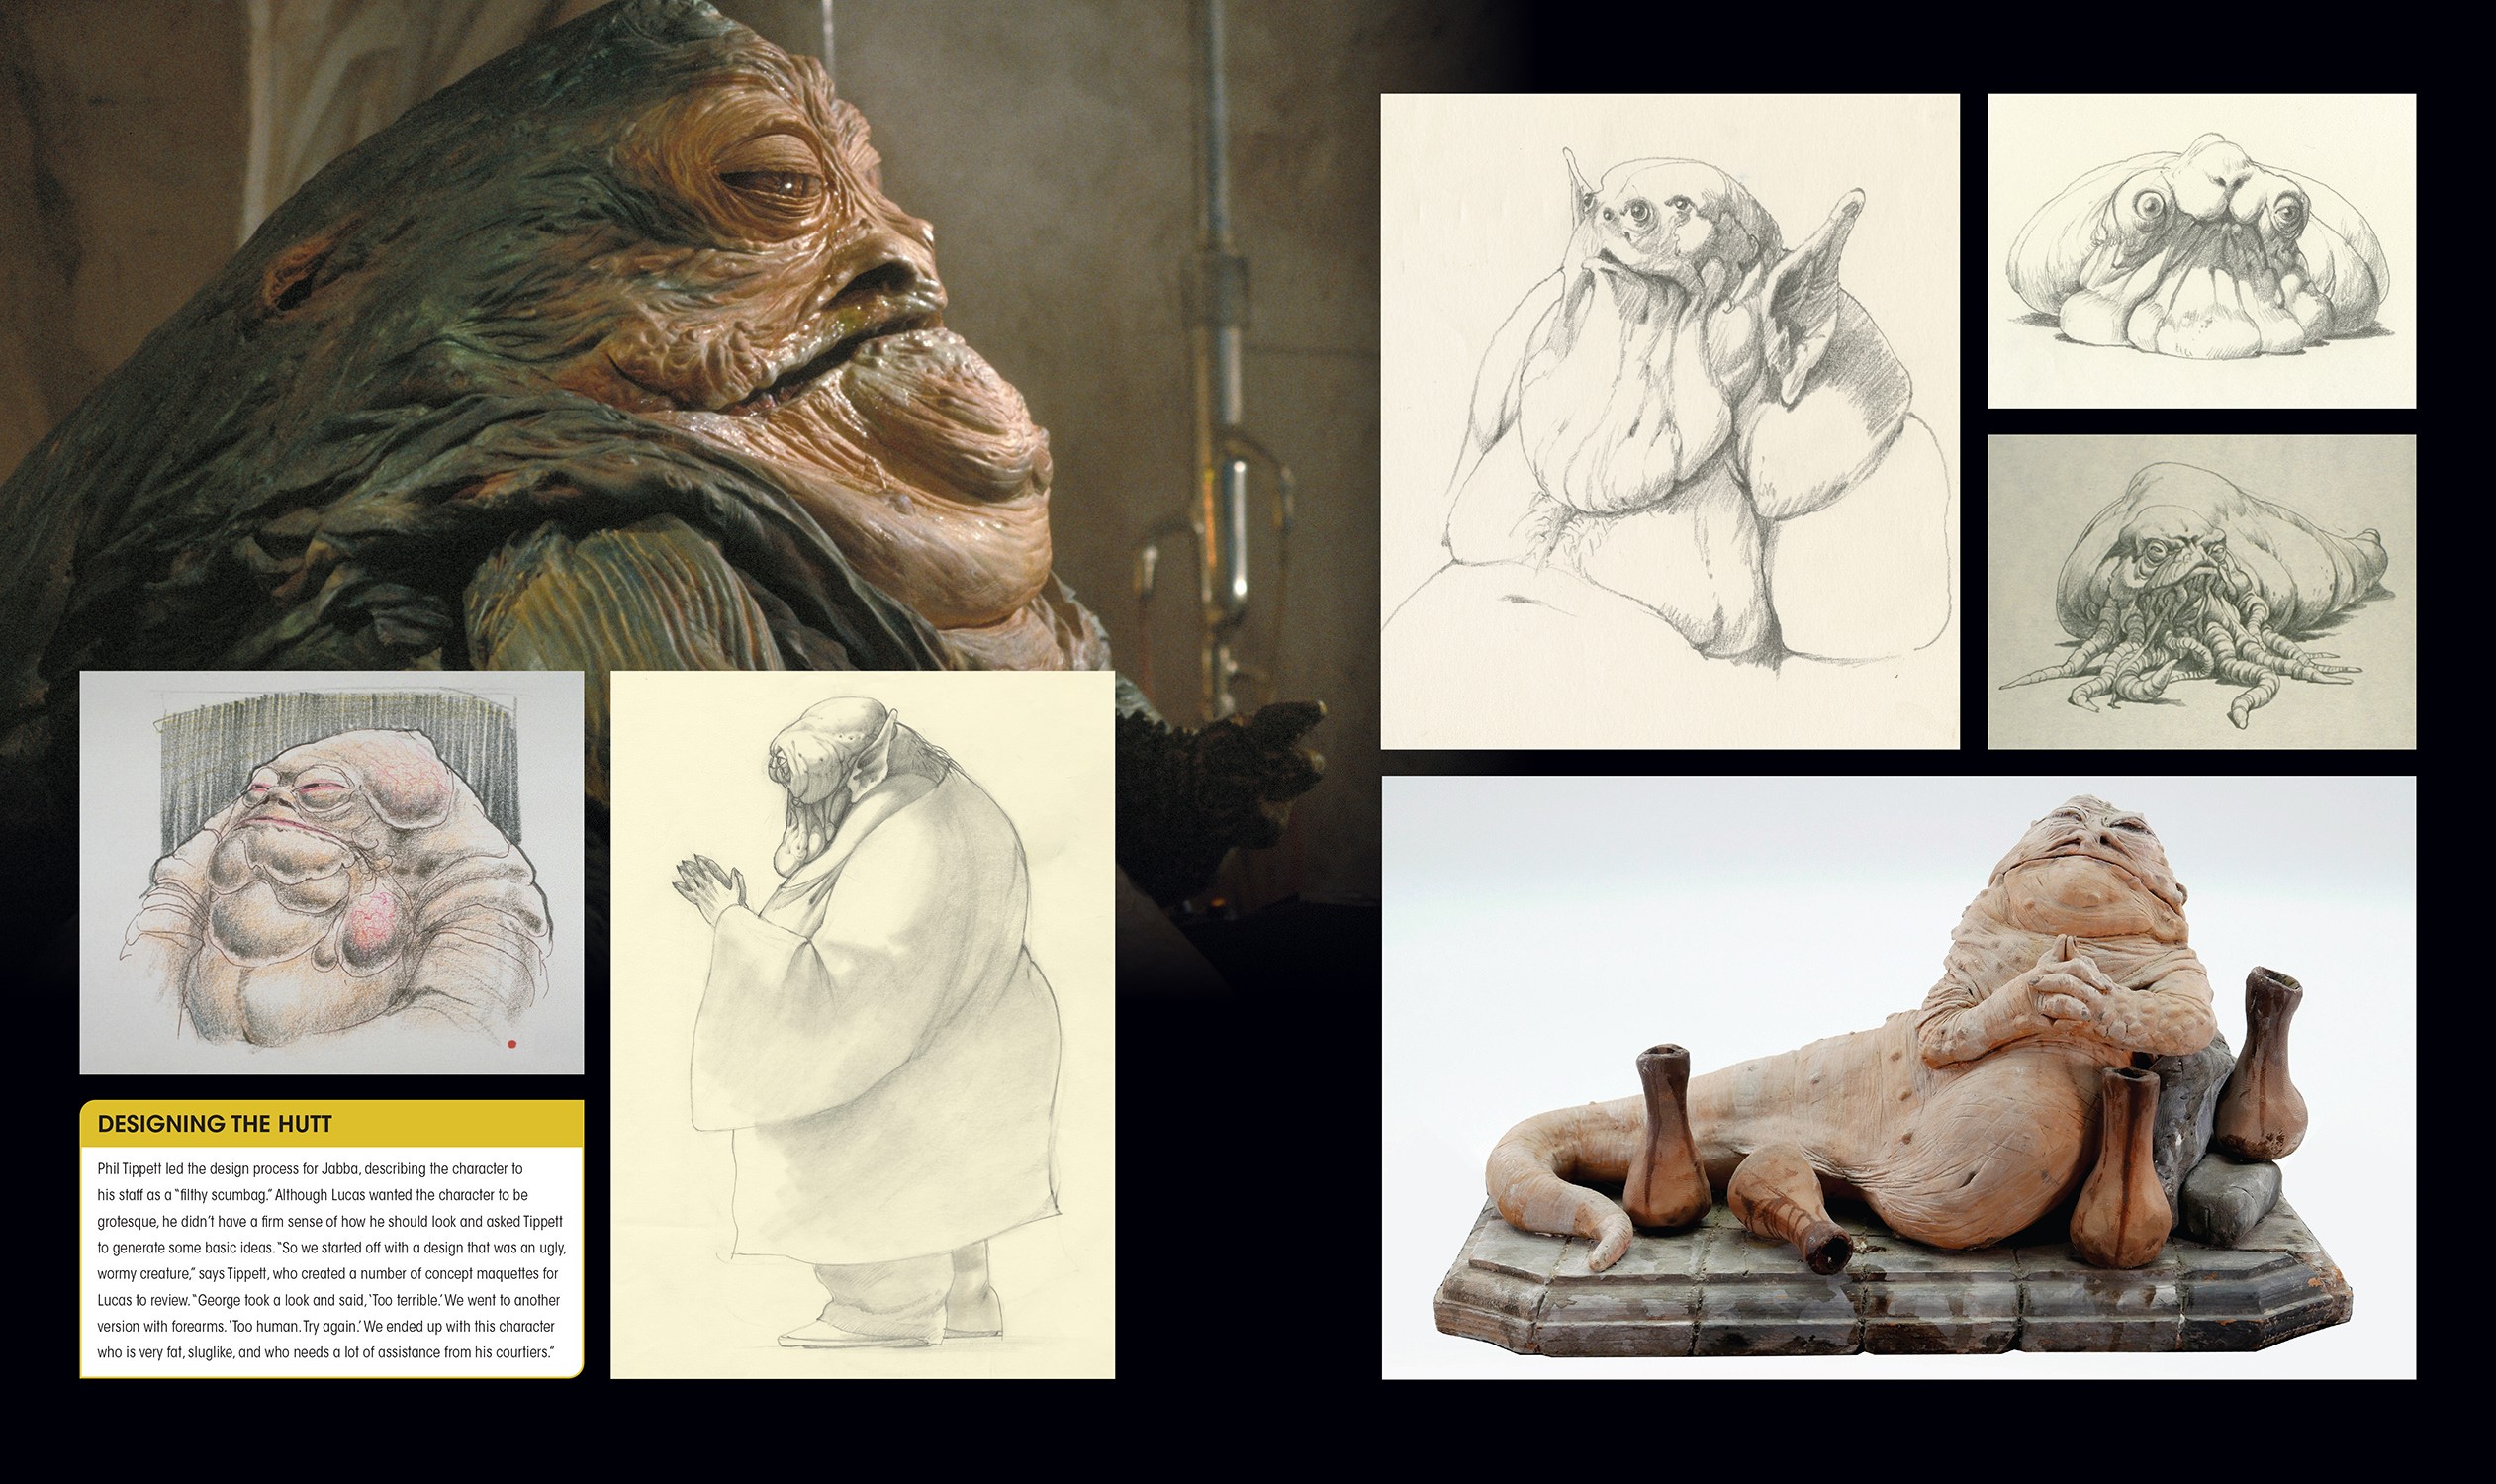 Star Wars: Return of the Jedi: A Visual Archive (Prototype Shown) View 7